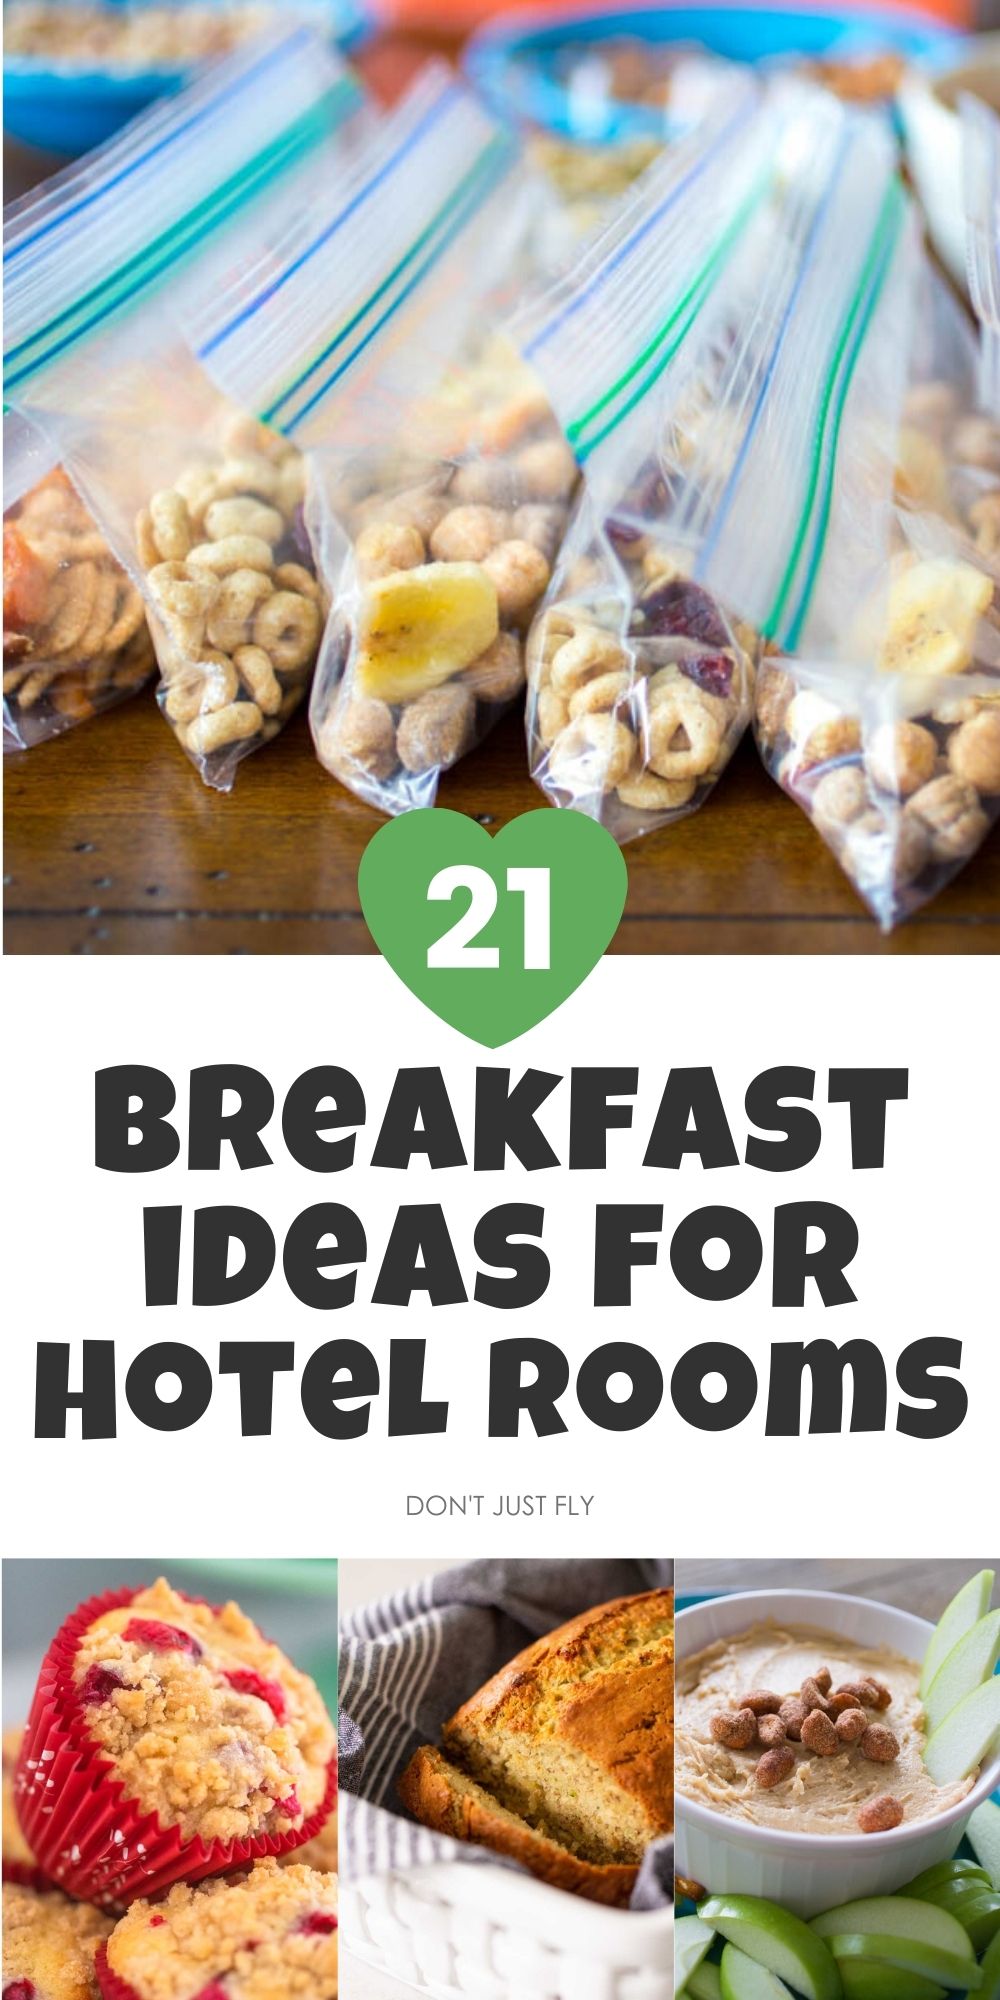 A photo collage shows several breakfast ideas for hotel rooms.